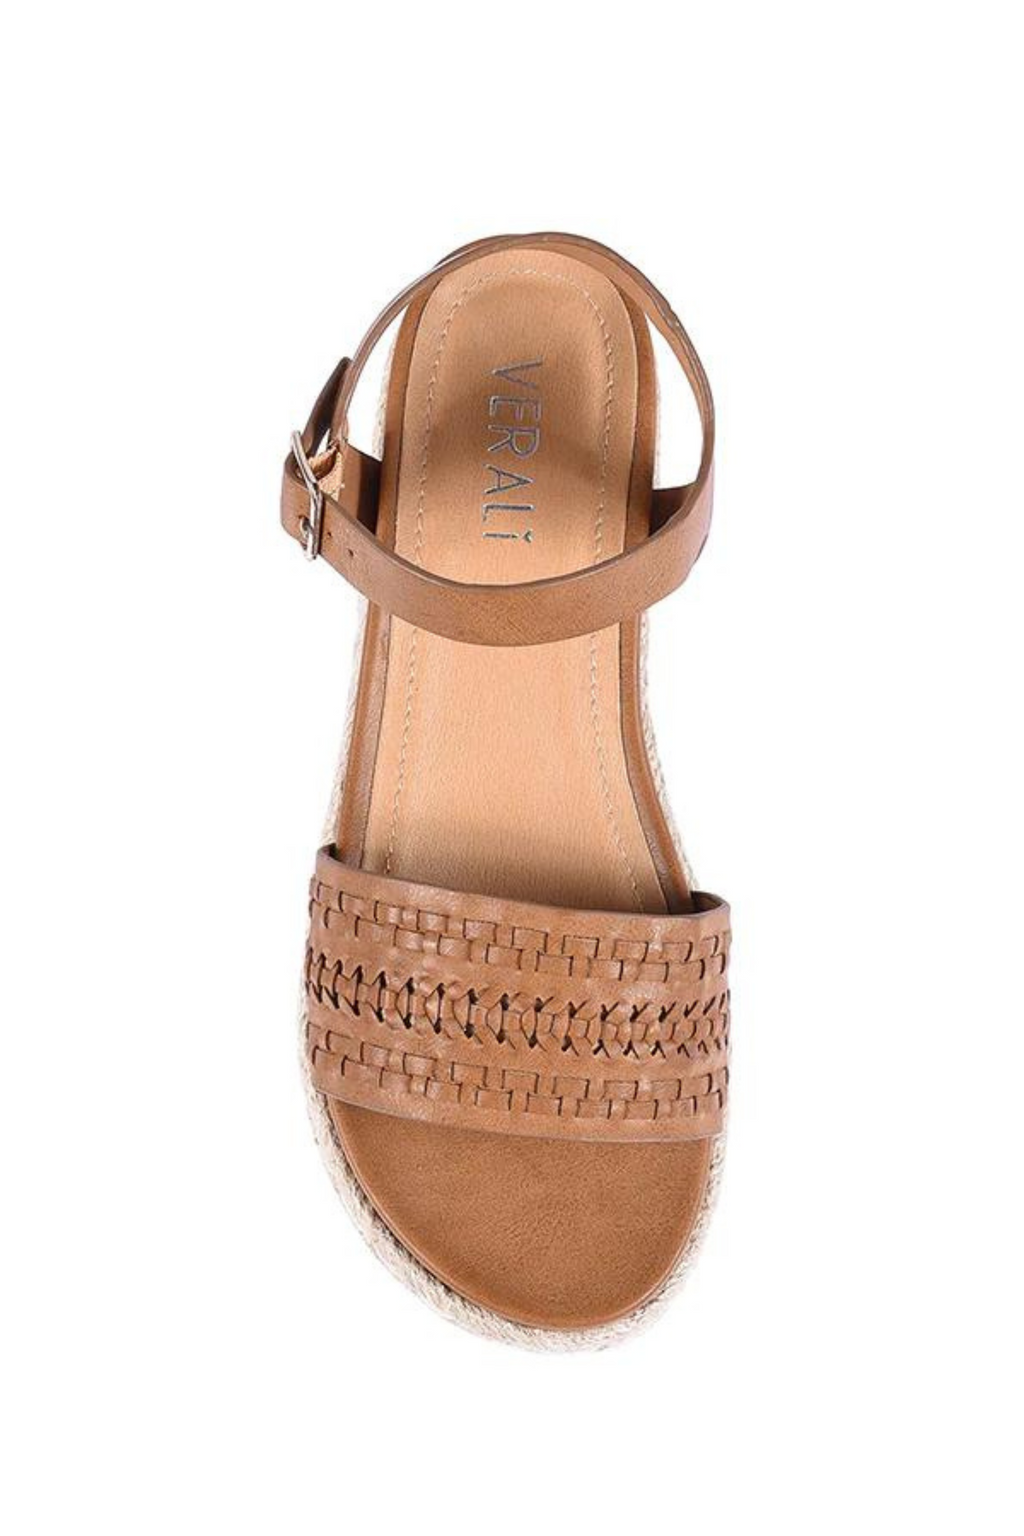 DISCO FOOTBED SANDALS - Tan Softee